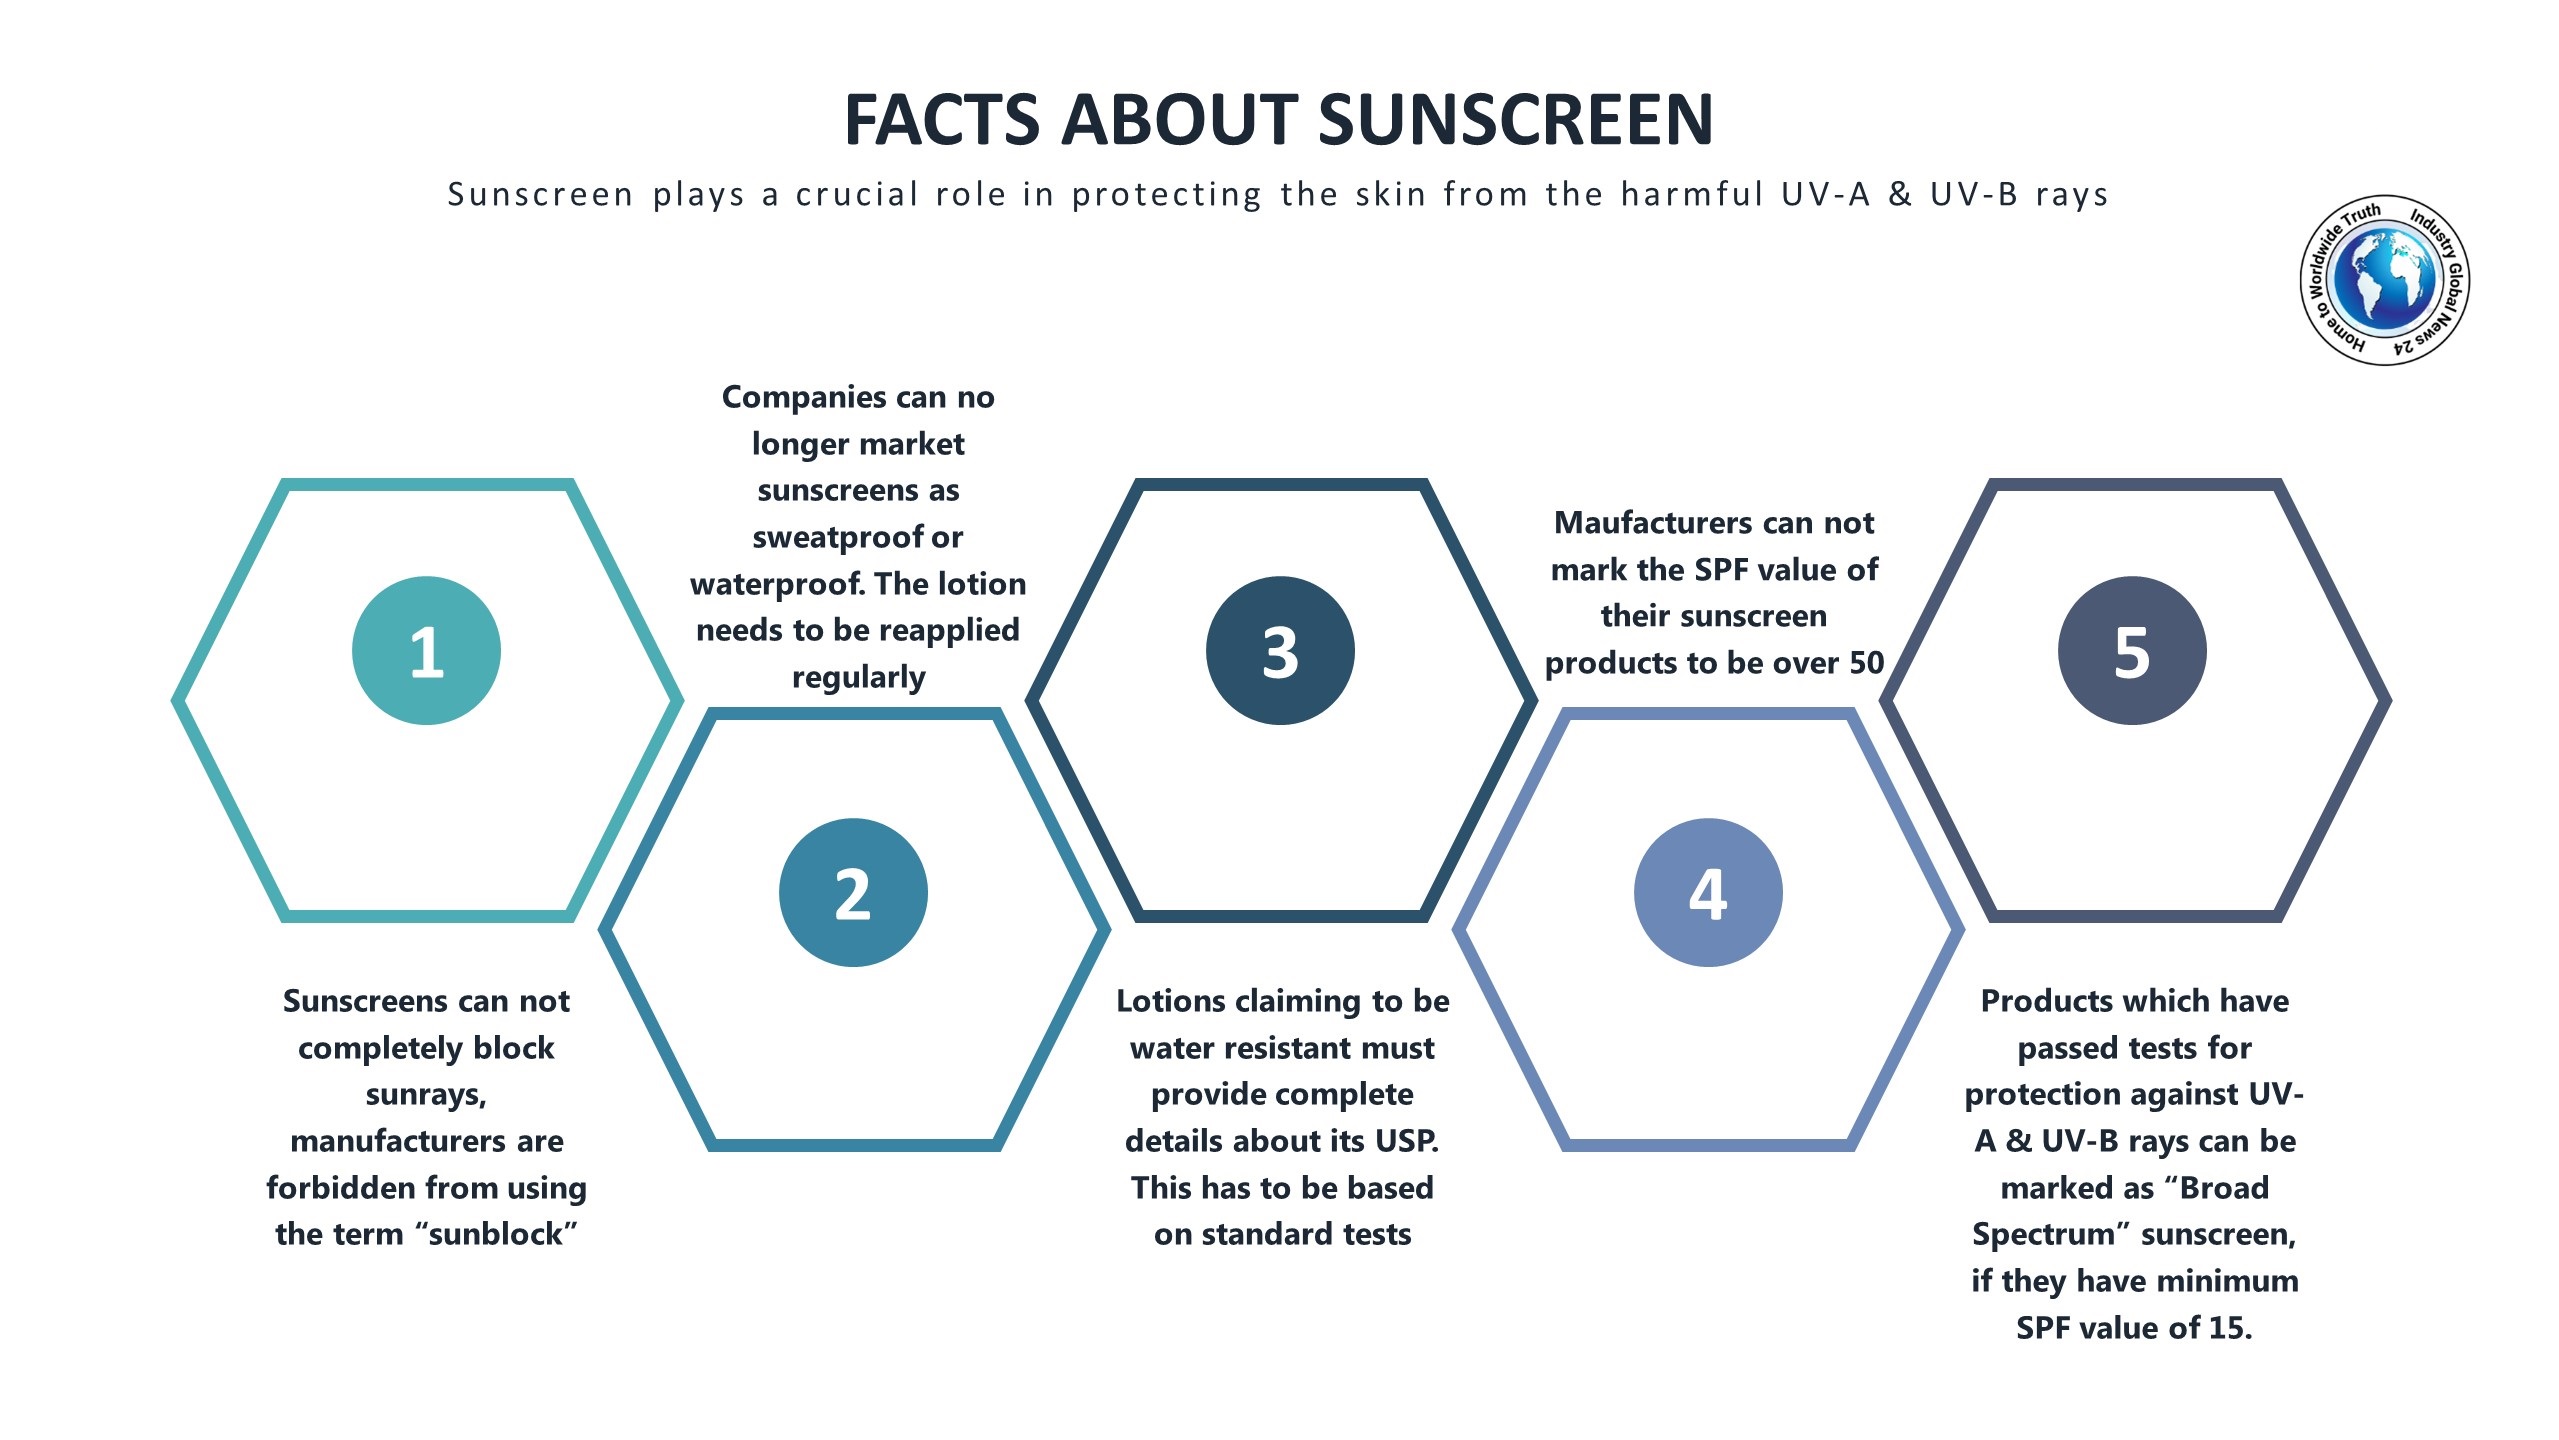 Facts about sunscreens